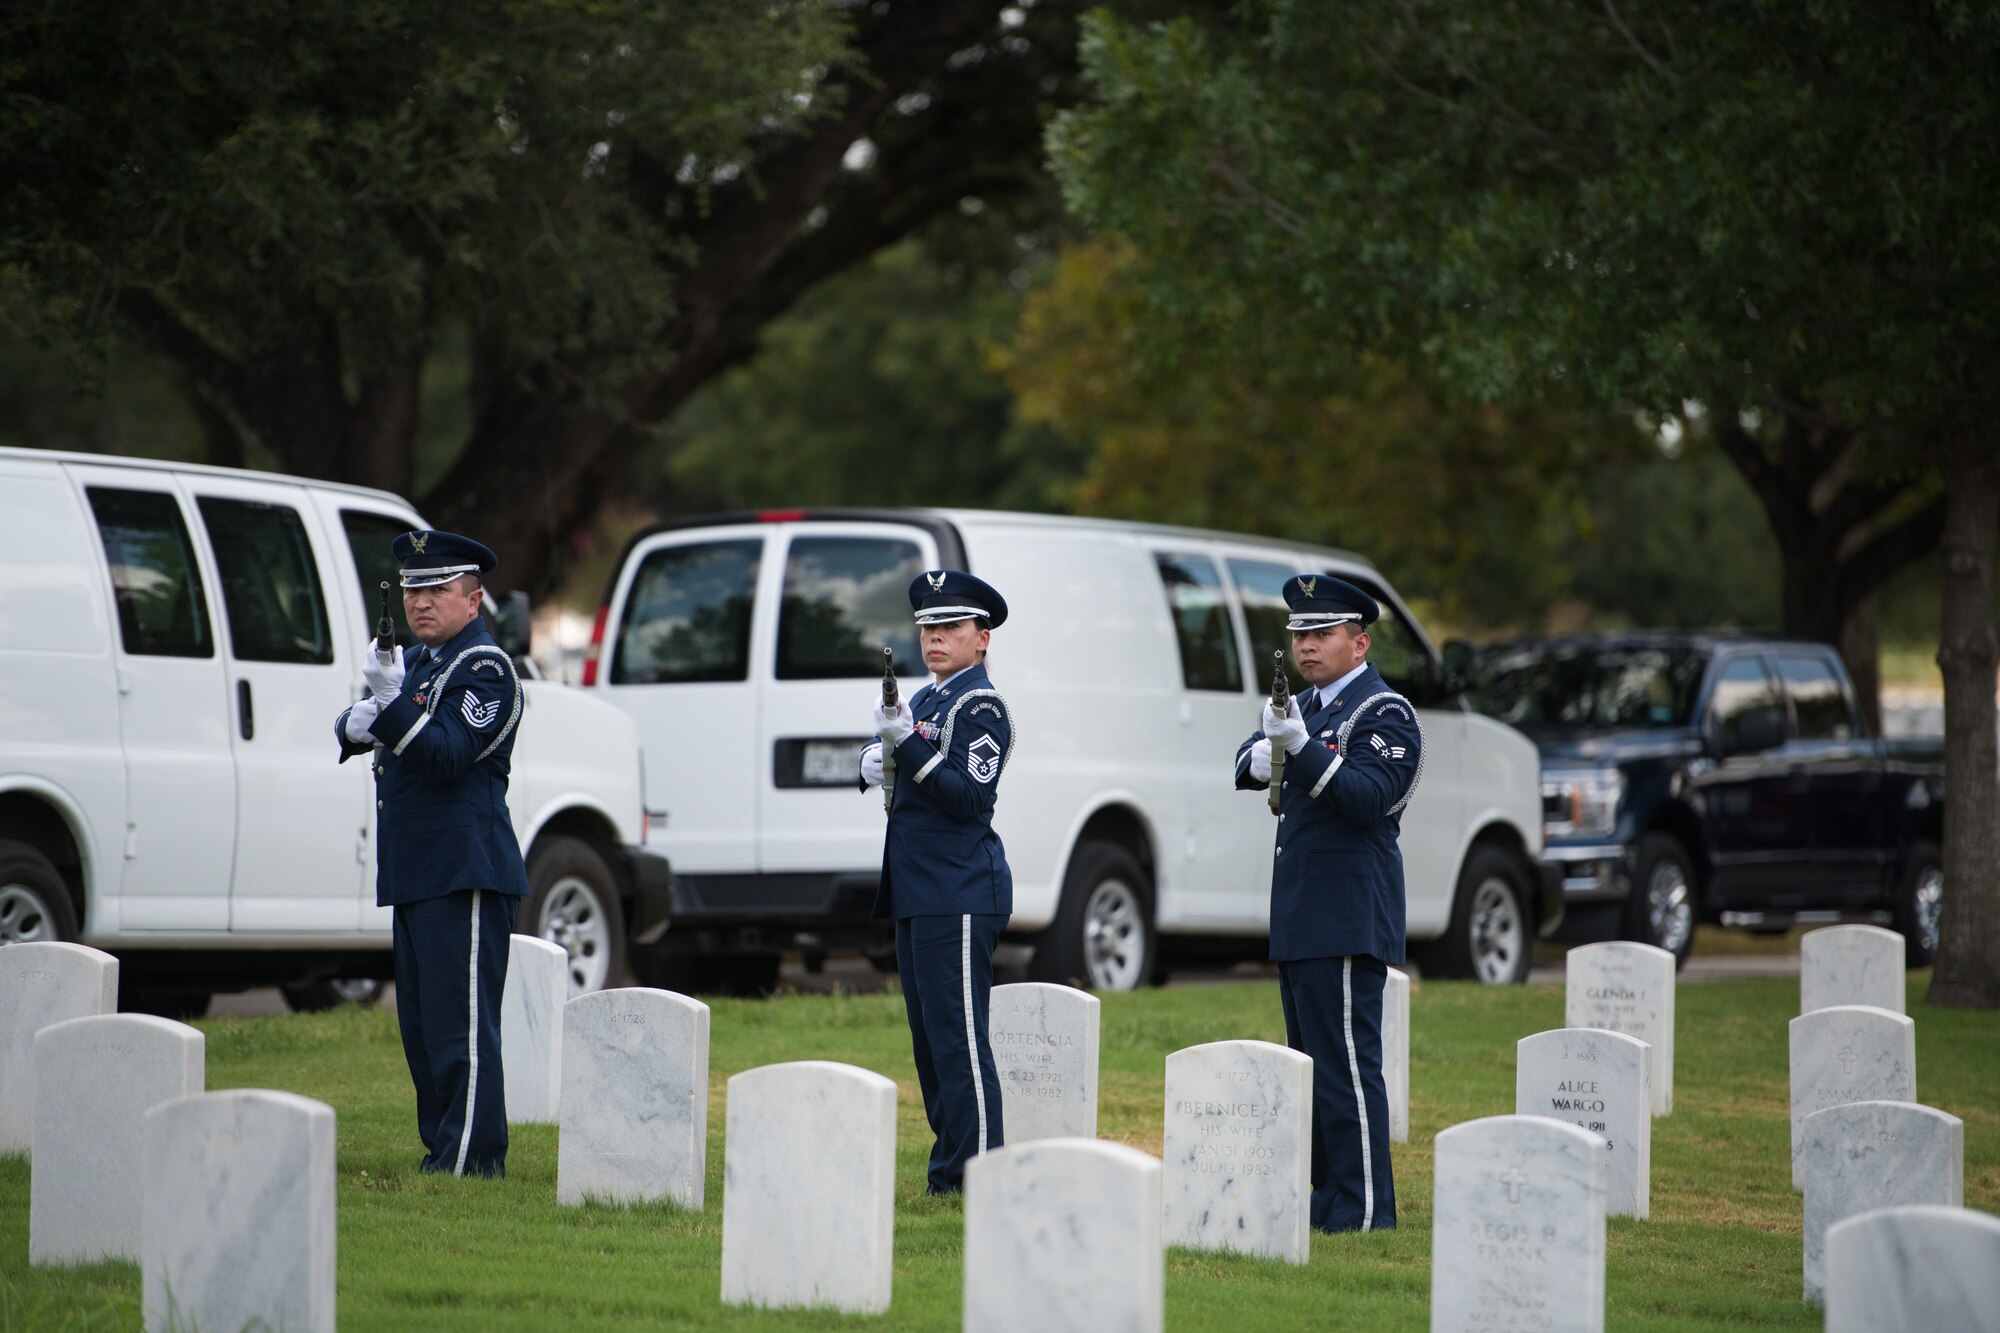 U.S. Air Force Honor Guard fire a 21-gun salute during the funeral ceremony of Oliver "Ollie" Crawford Aug. 5, 2019, at Joint Base San Antonio-Fort Sam Houston, Texas. "Ollie" passed away at the age of 94, on Sunday, July 21, 2019 in San Antonio, Texas.